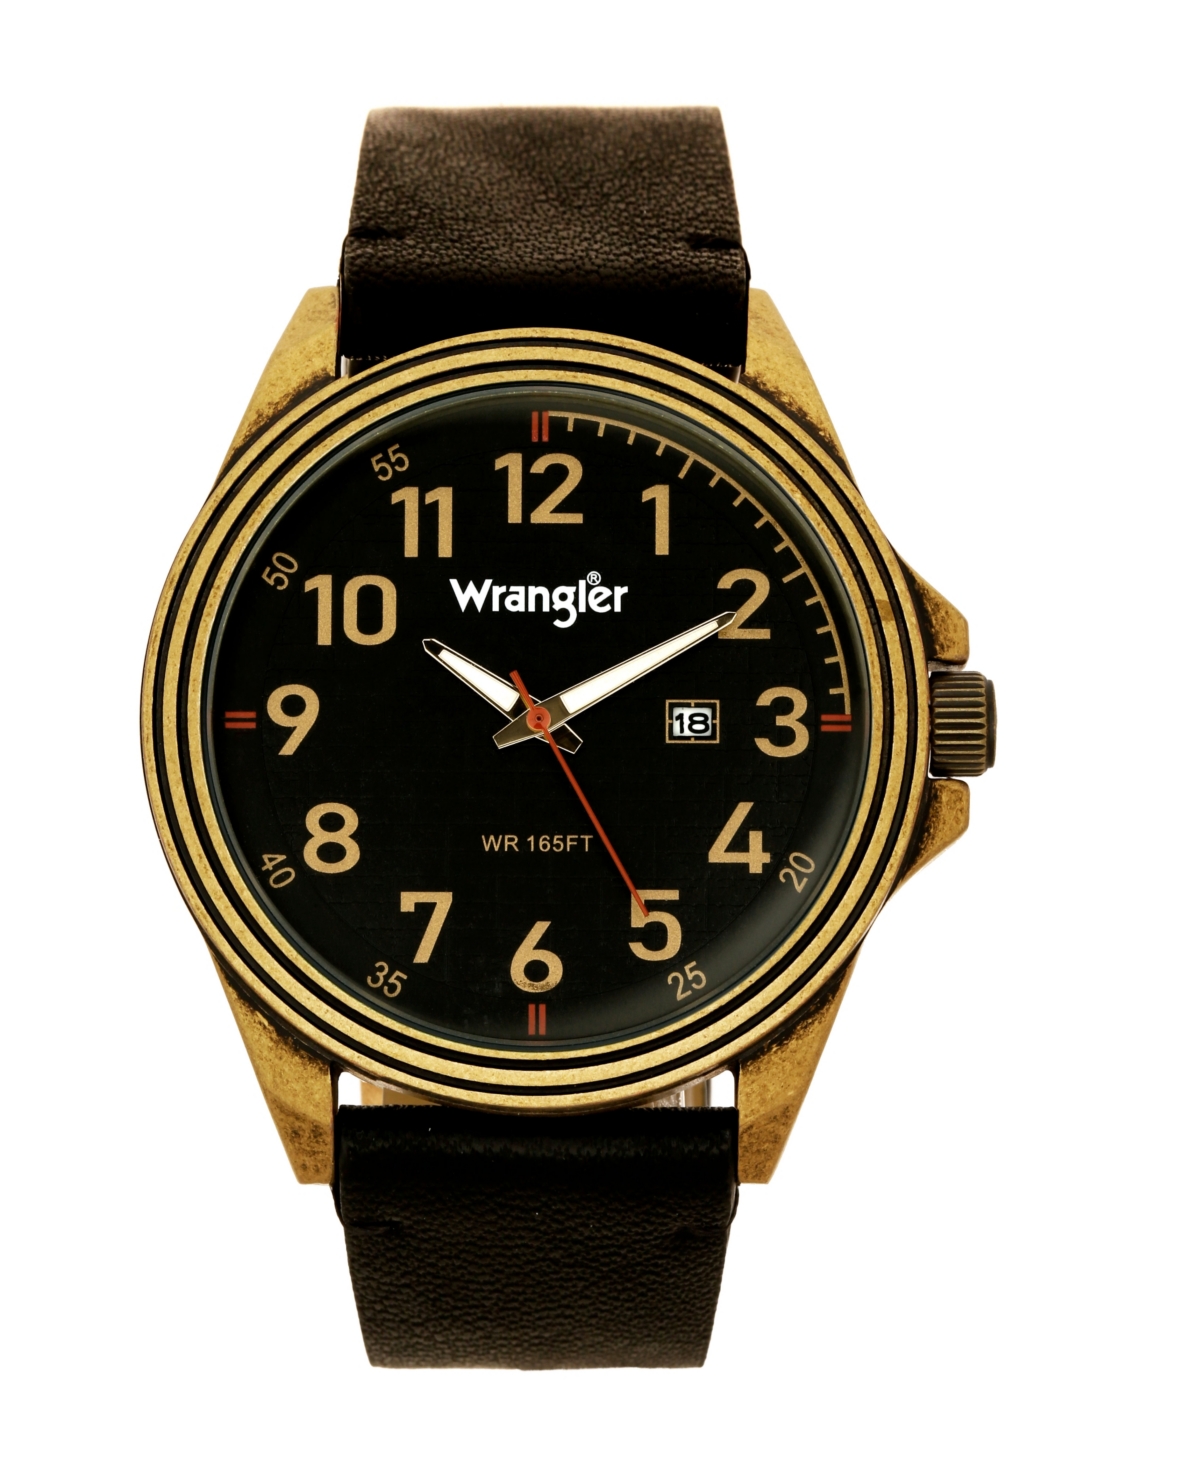 Men's Watch, 48MM Antique Brass Case, Black Dial with Bronze Arabic Numerals, Brown Strap, Analog Watch, Red Second Hand, Date Function - Bro